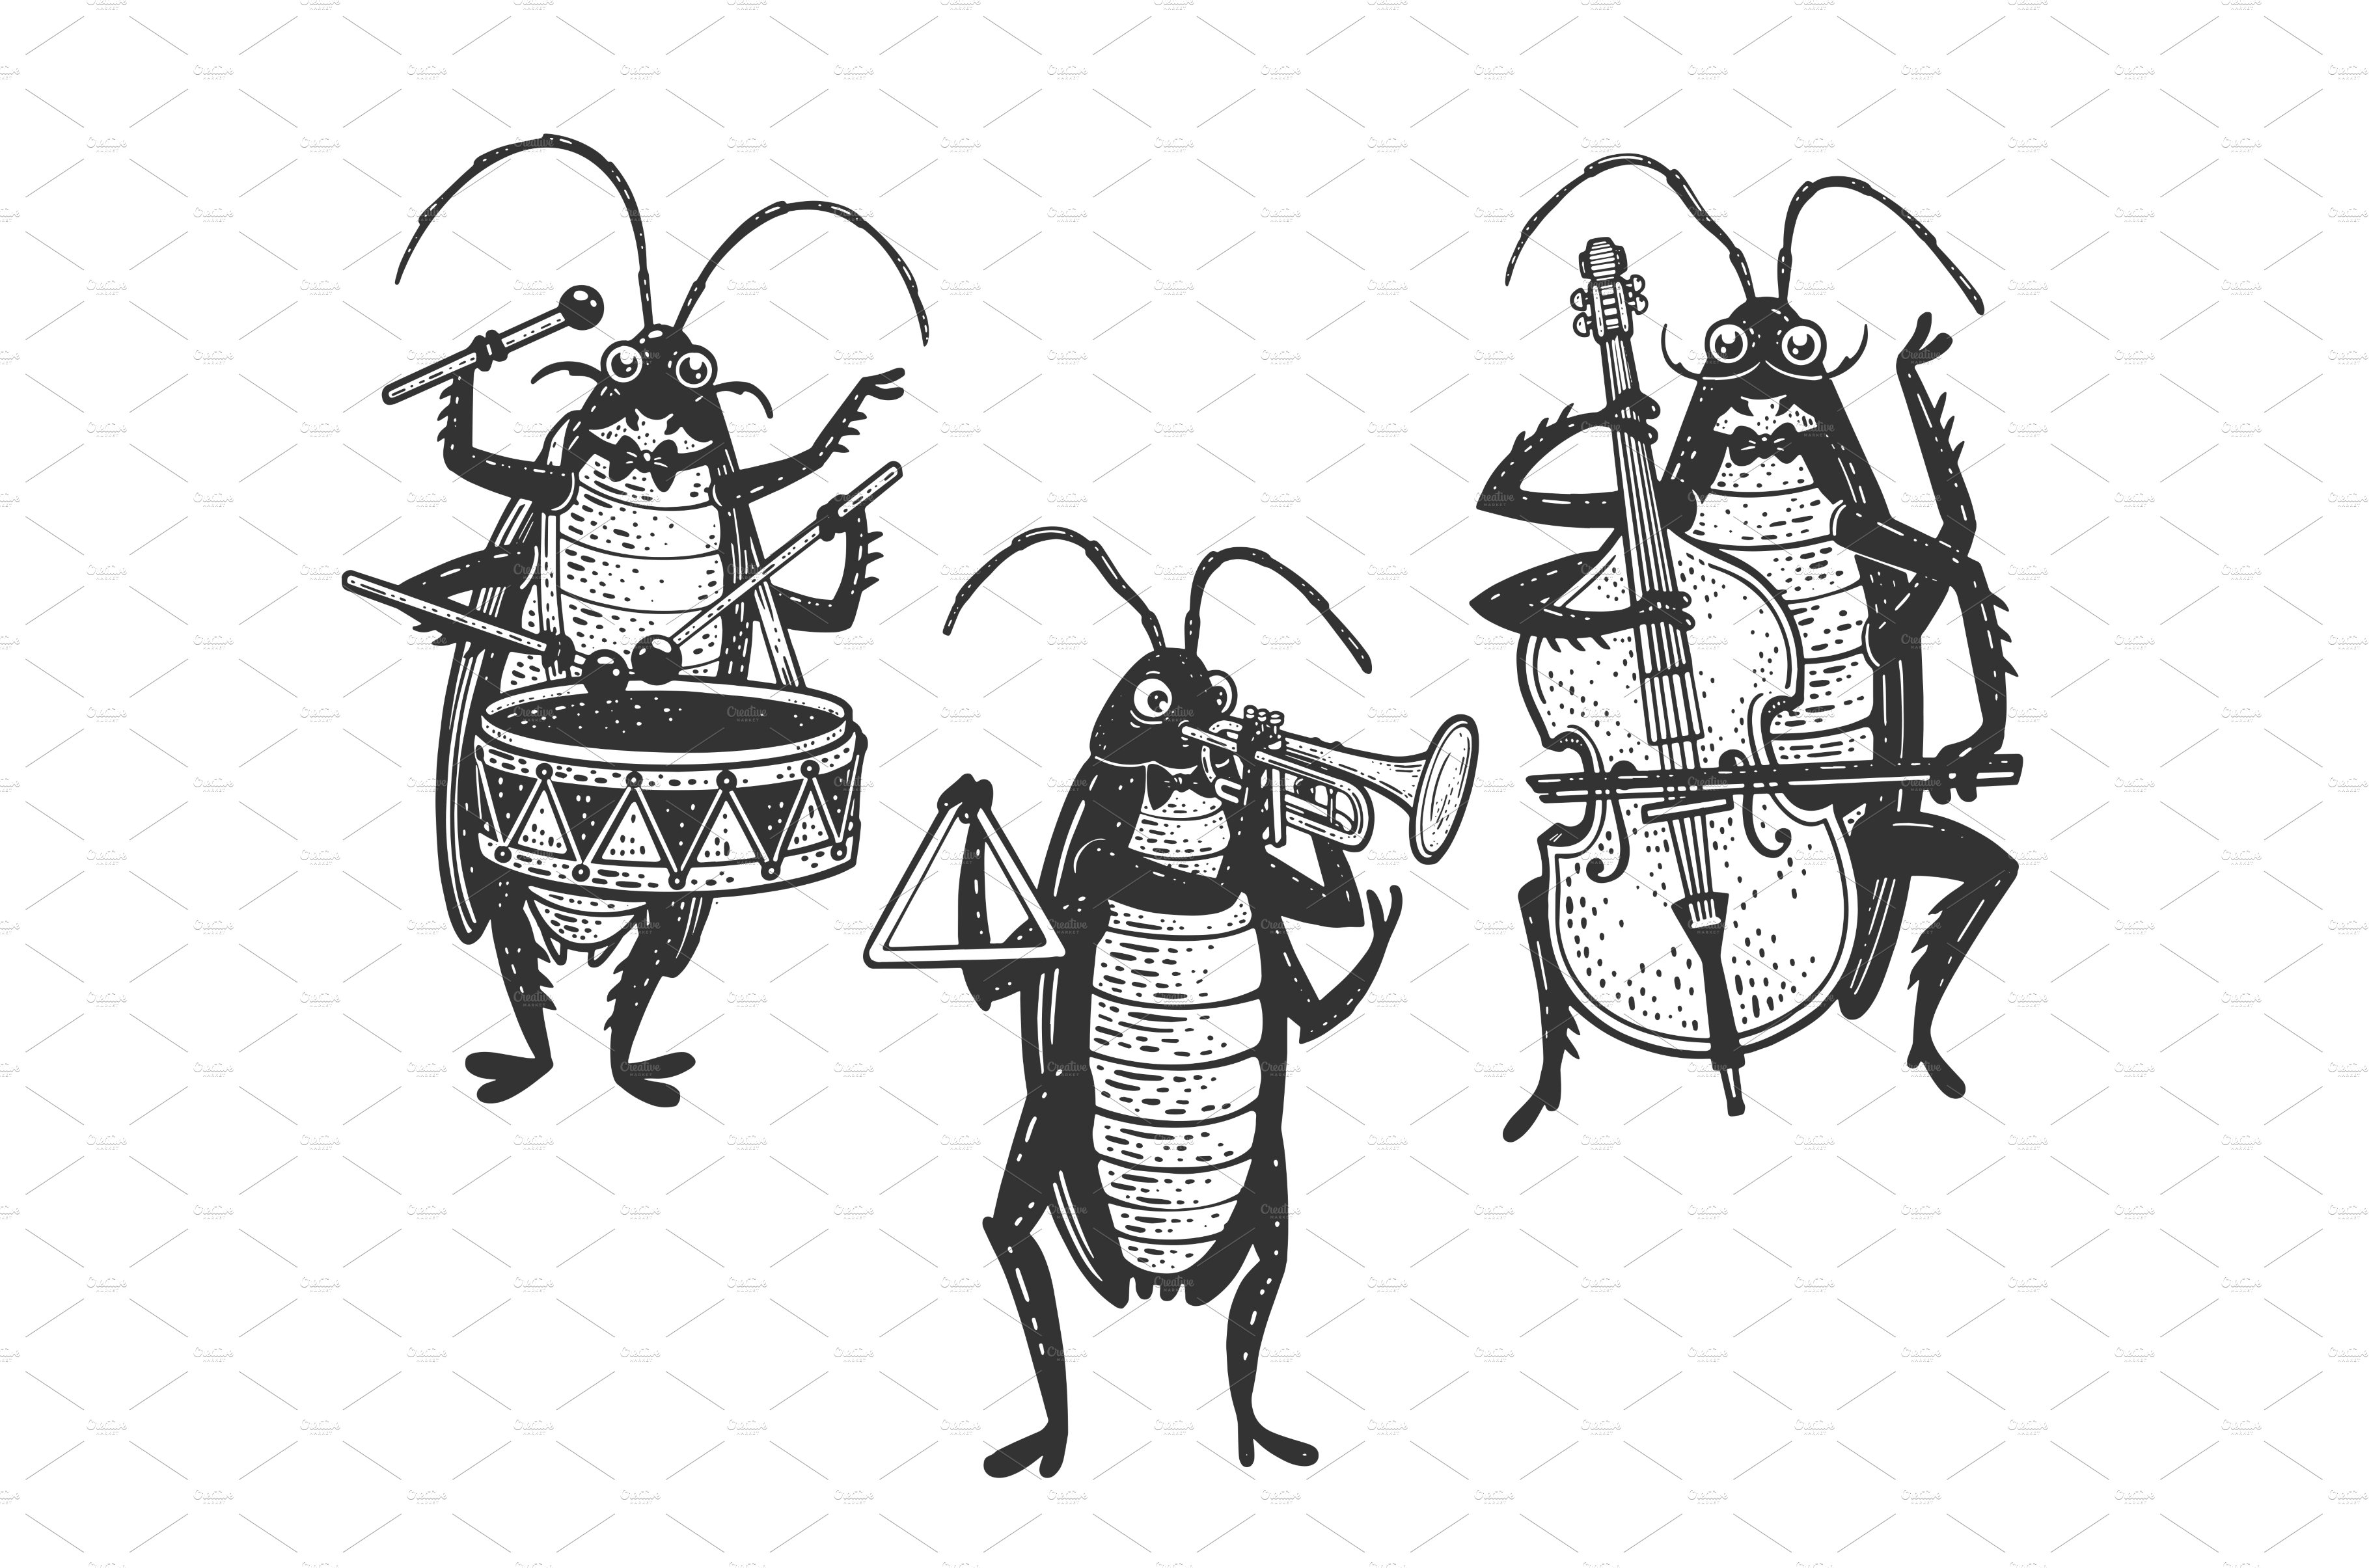 Cockroach orchestra sketch vector cover image.